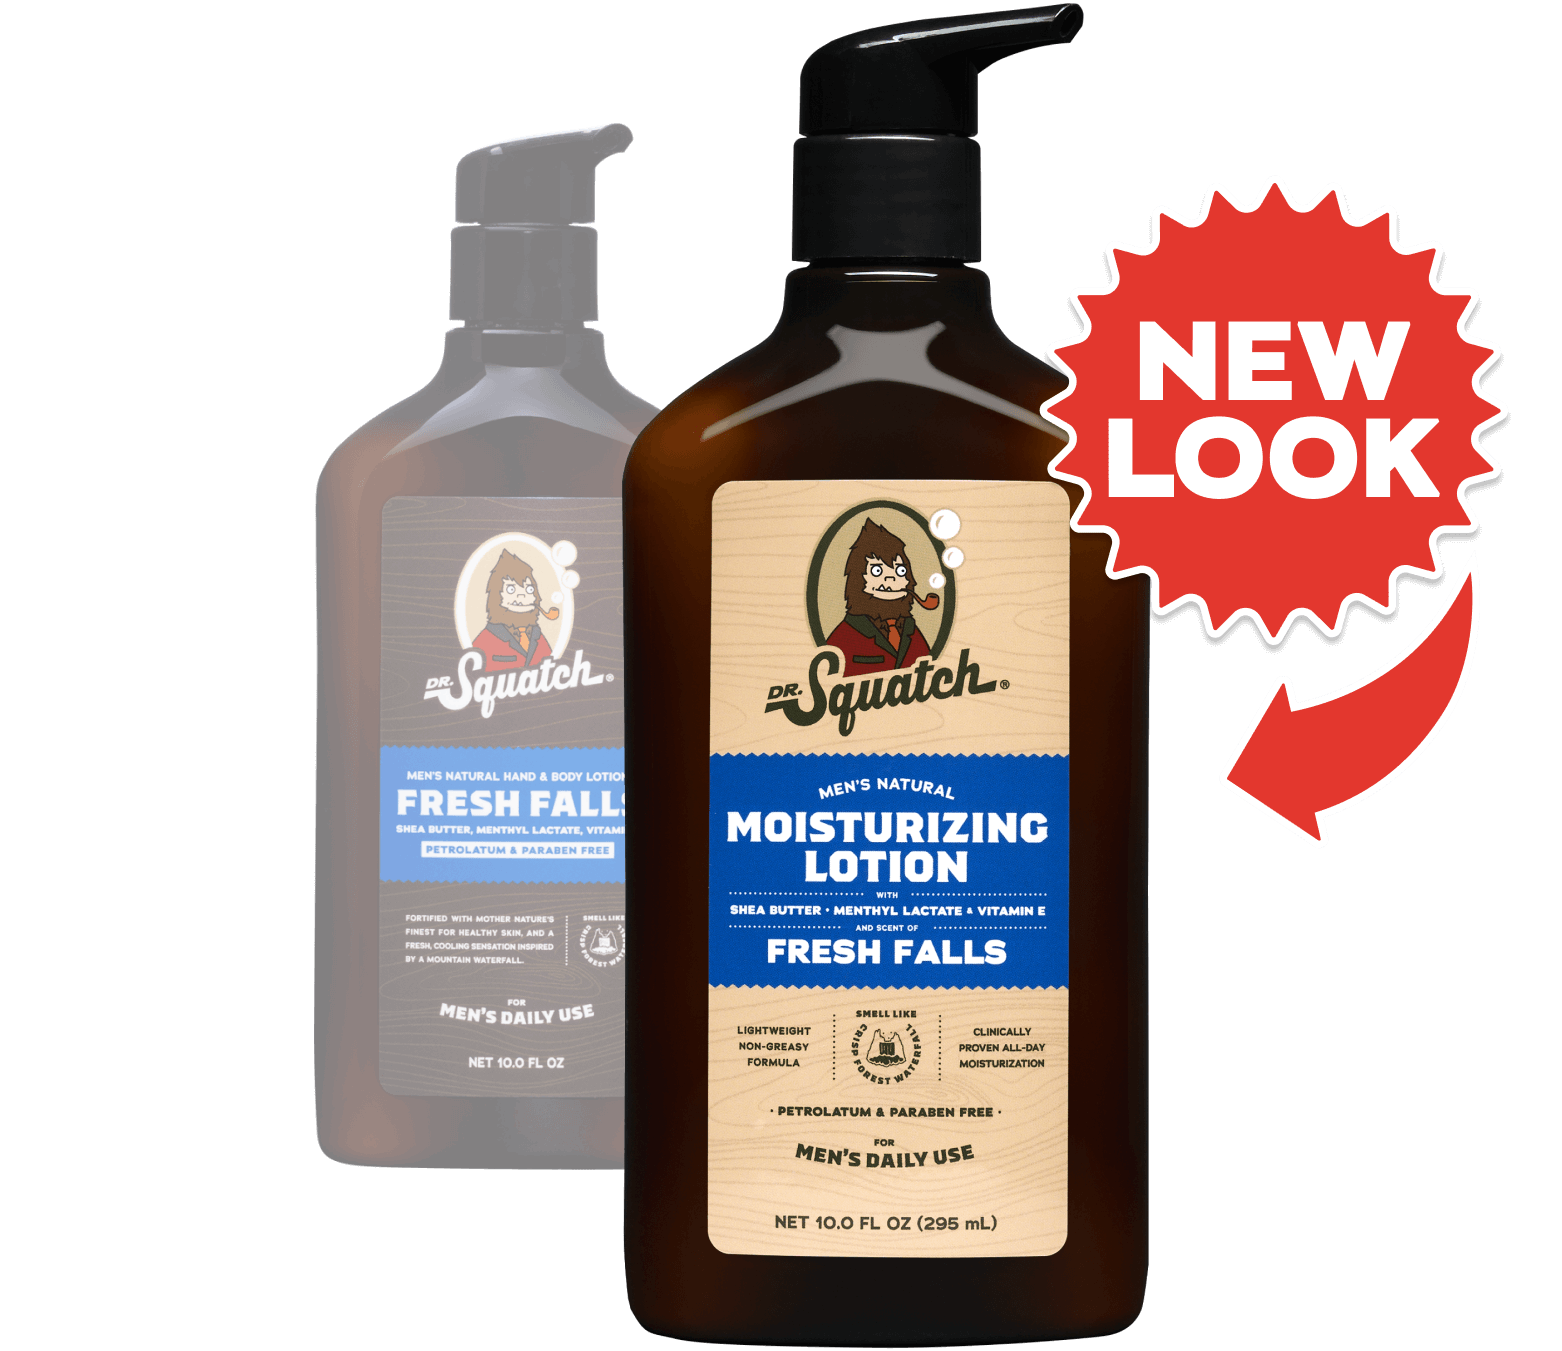 Leading Natural Men's Personal Care Brand, Dr. Squatch, Announces Category  Expansion With New Natural Lotion